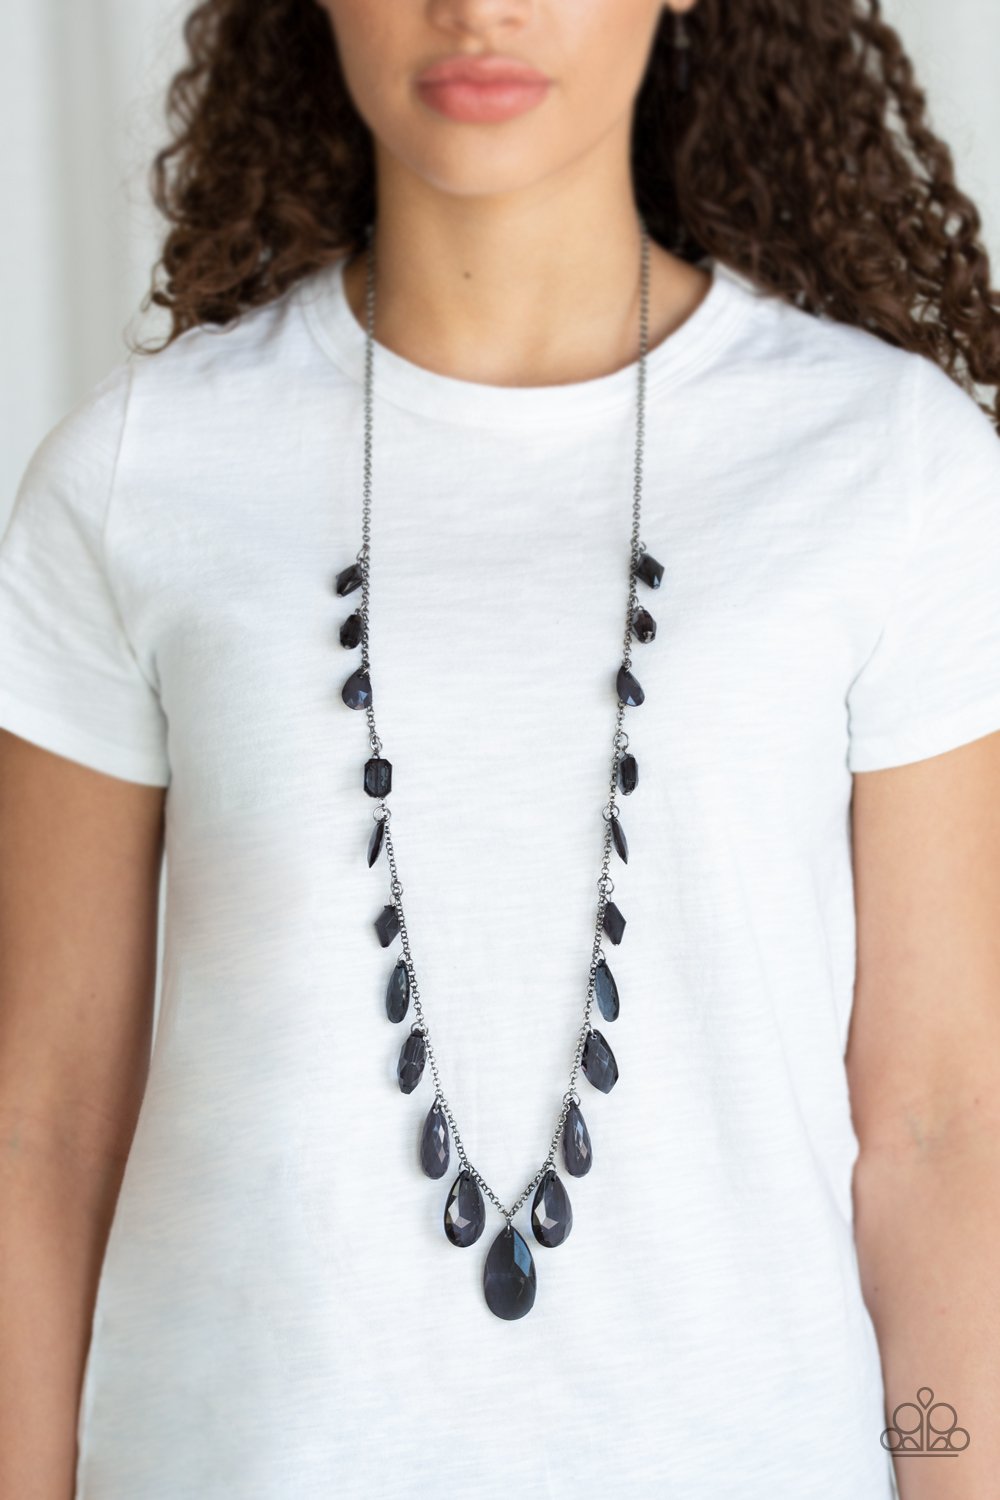 GLOW and Steady Wins the Race-black-Paparazzi necklace